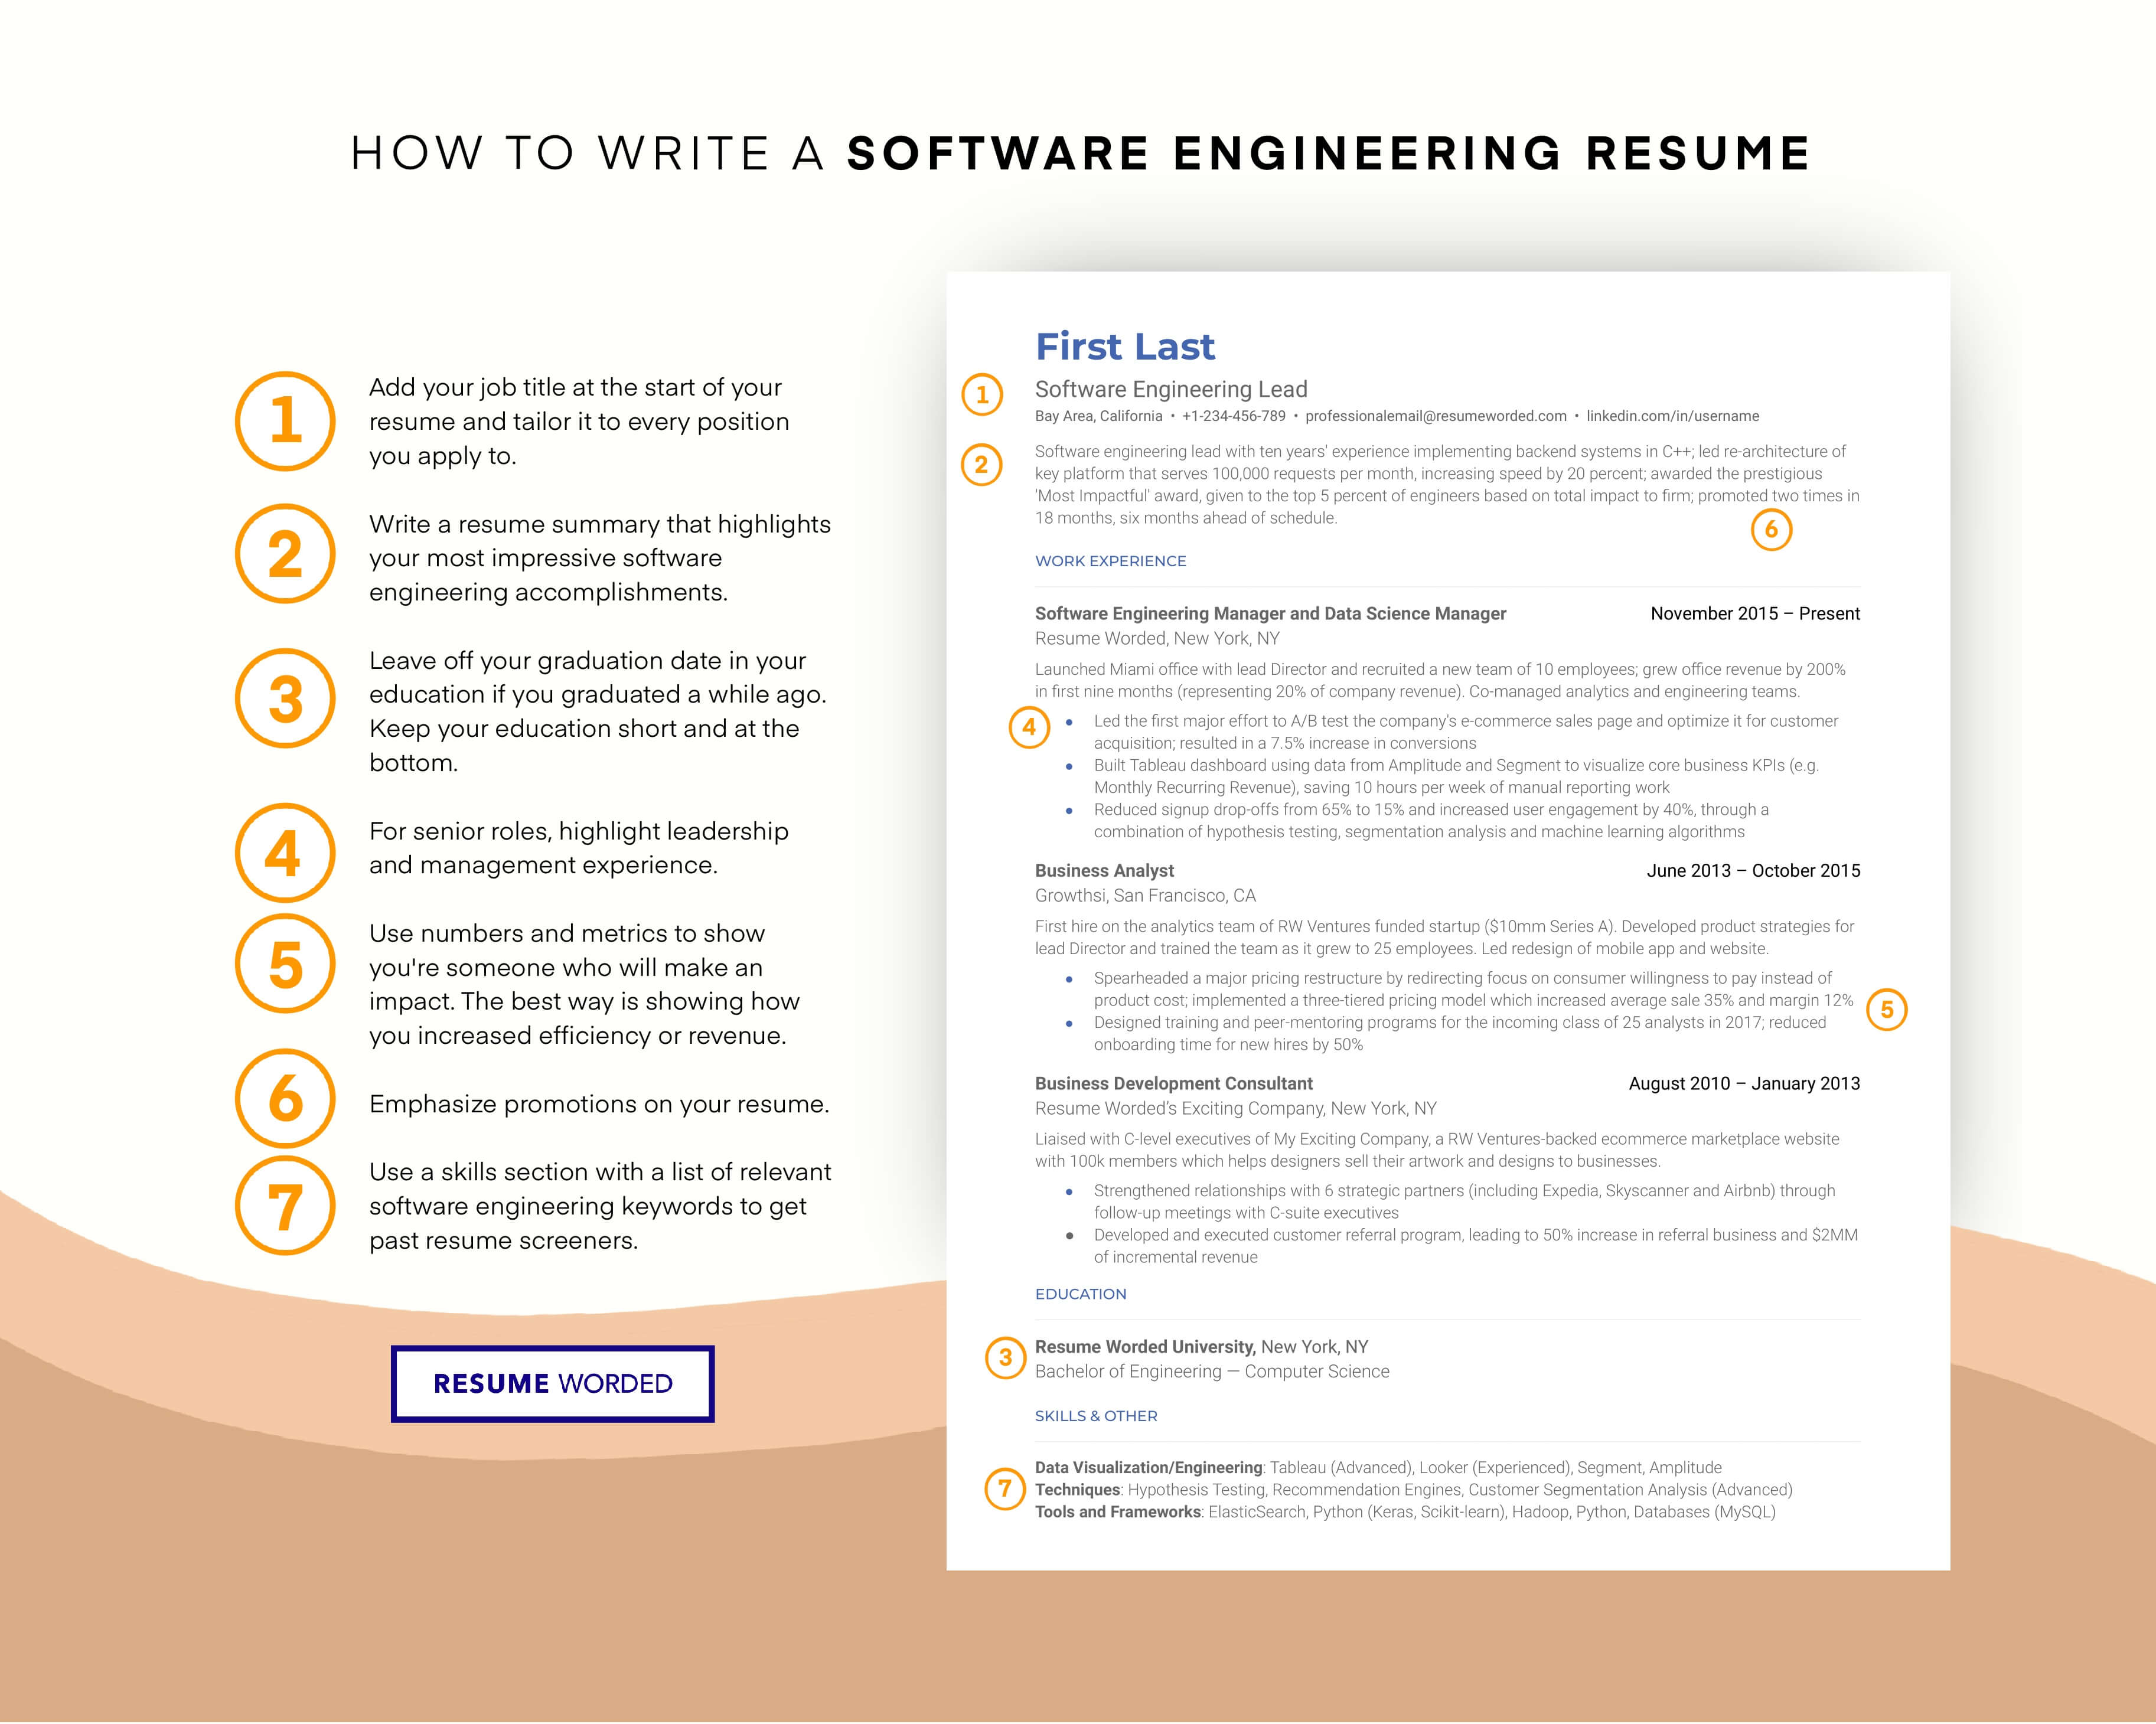 Ensure the resume scanning software can read your resume template